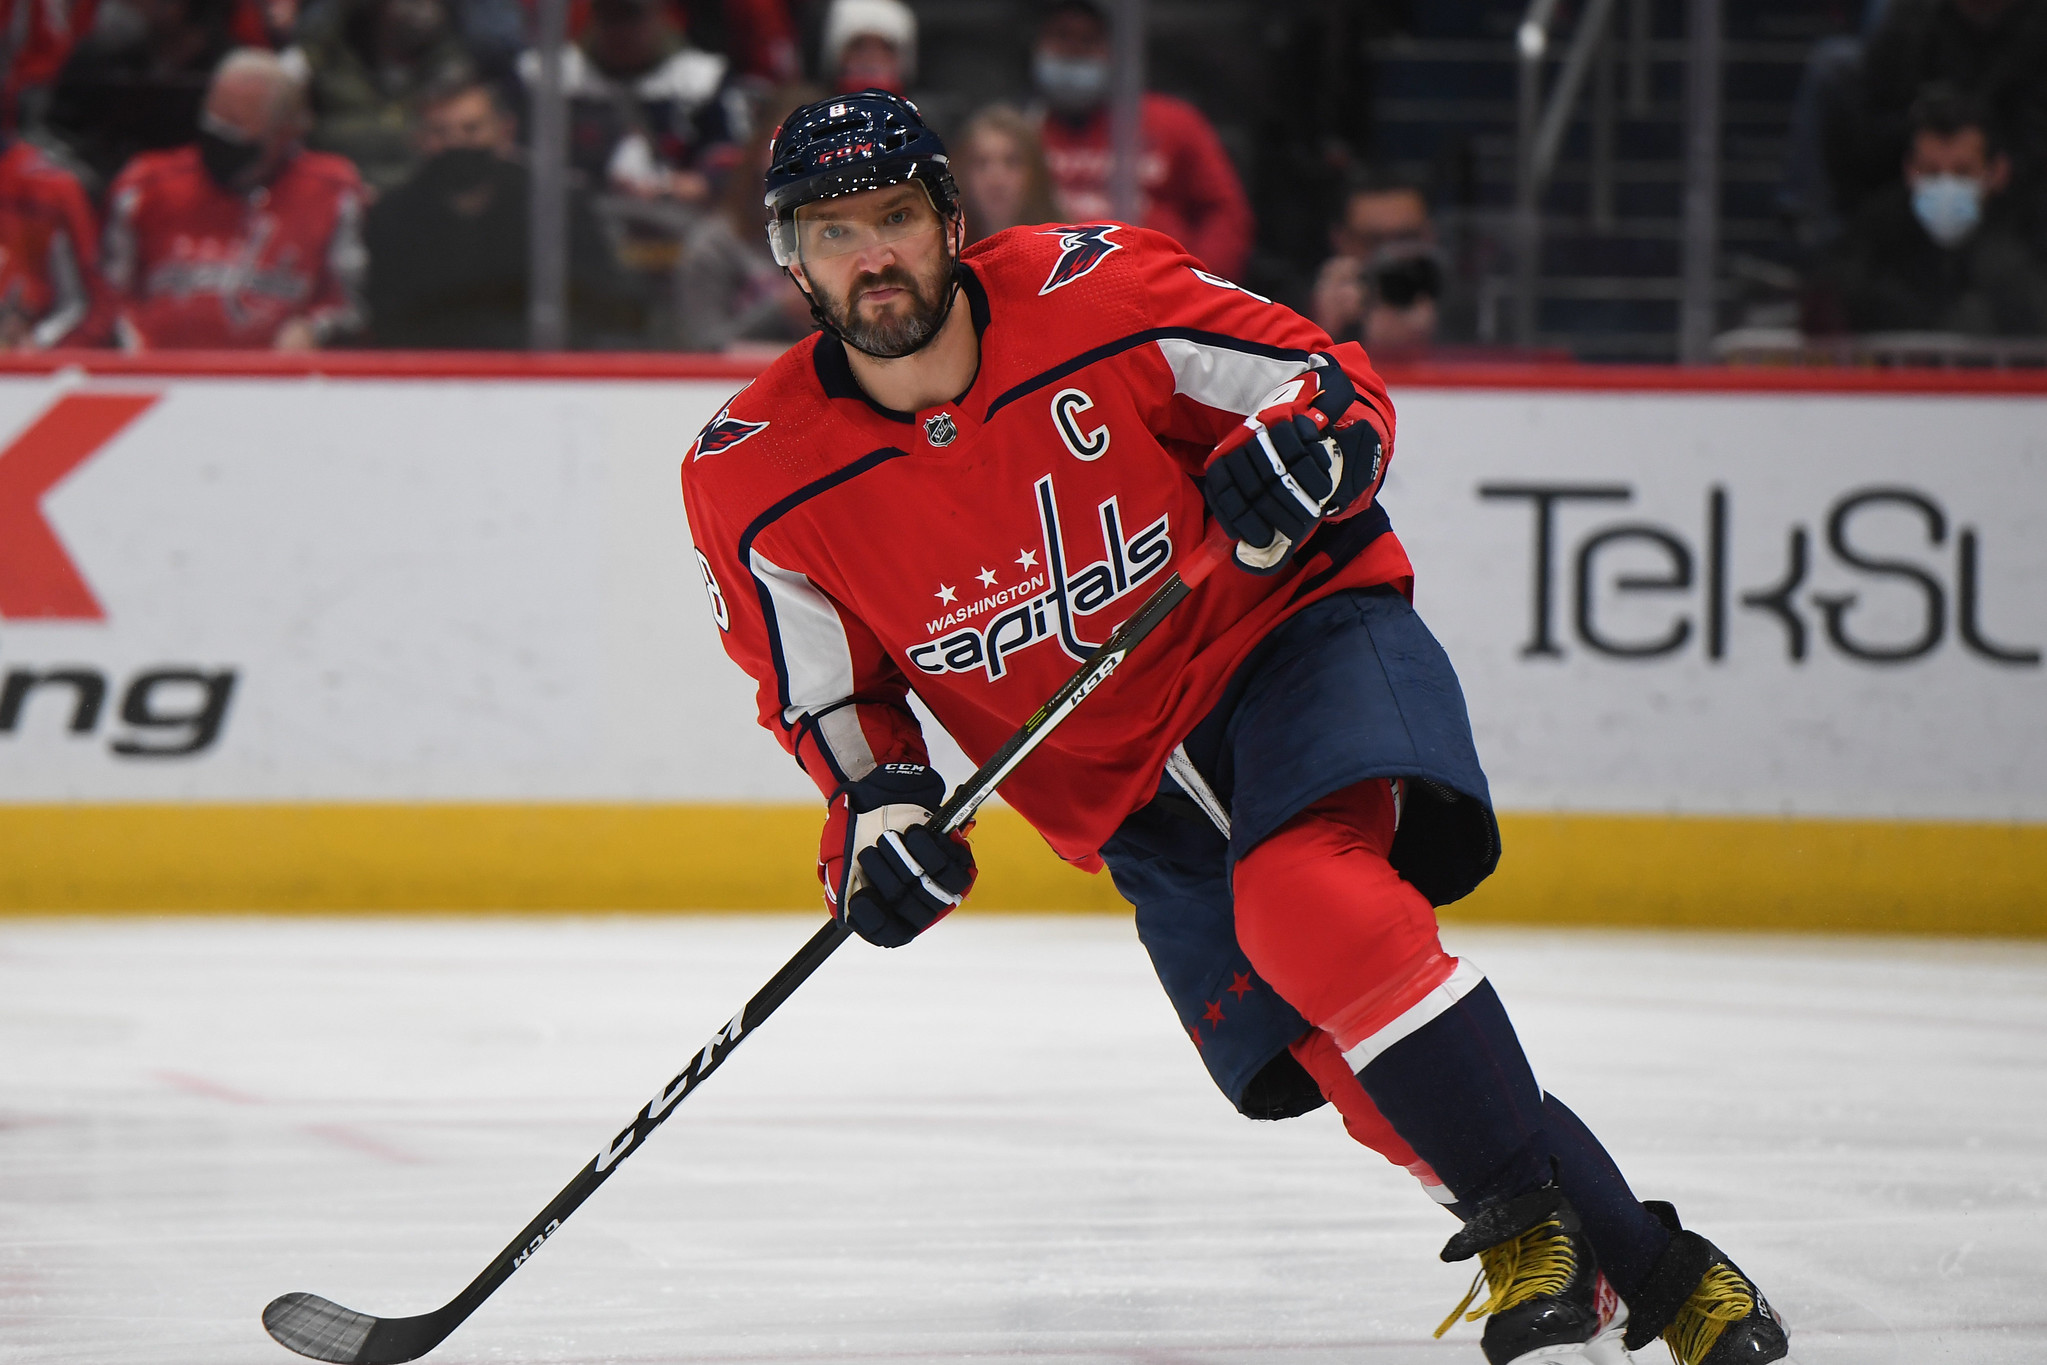 Alex Ovechkin on the trail of Wayne Gretzky's NHL goals record and